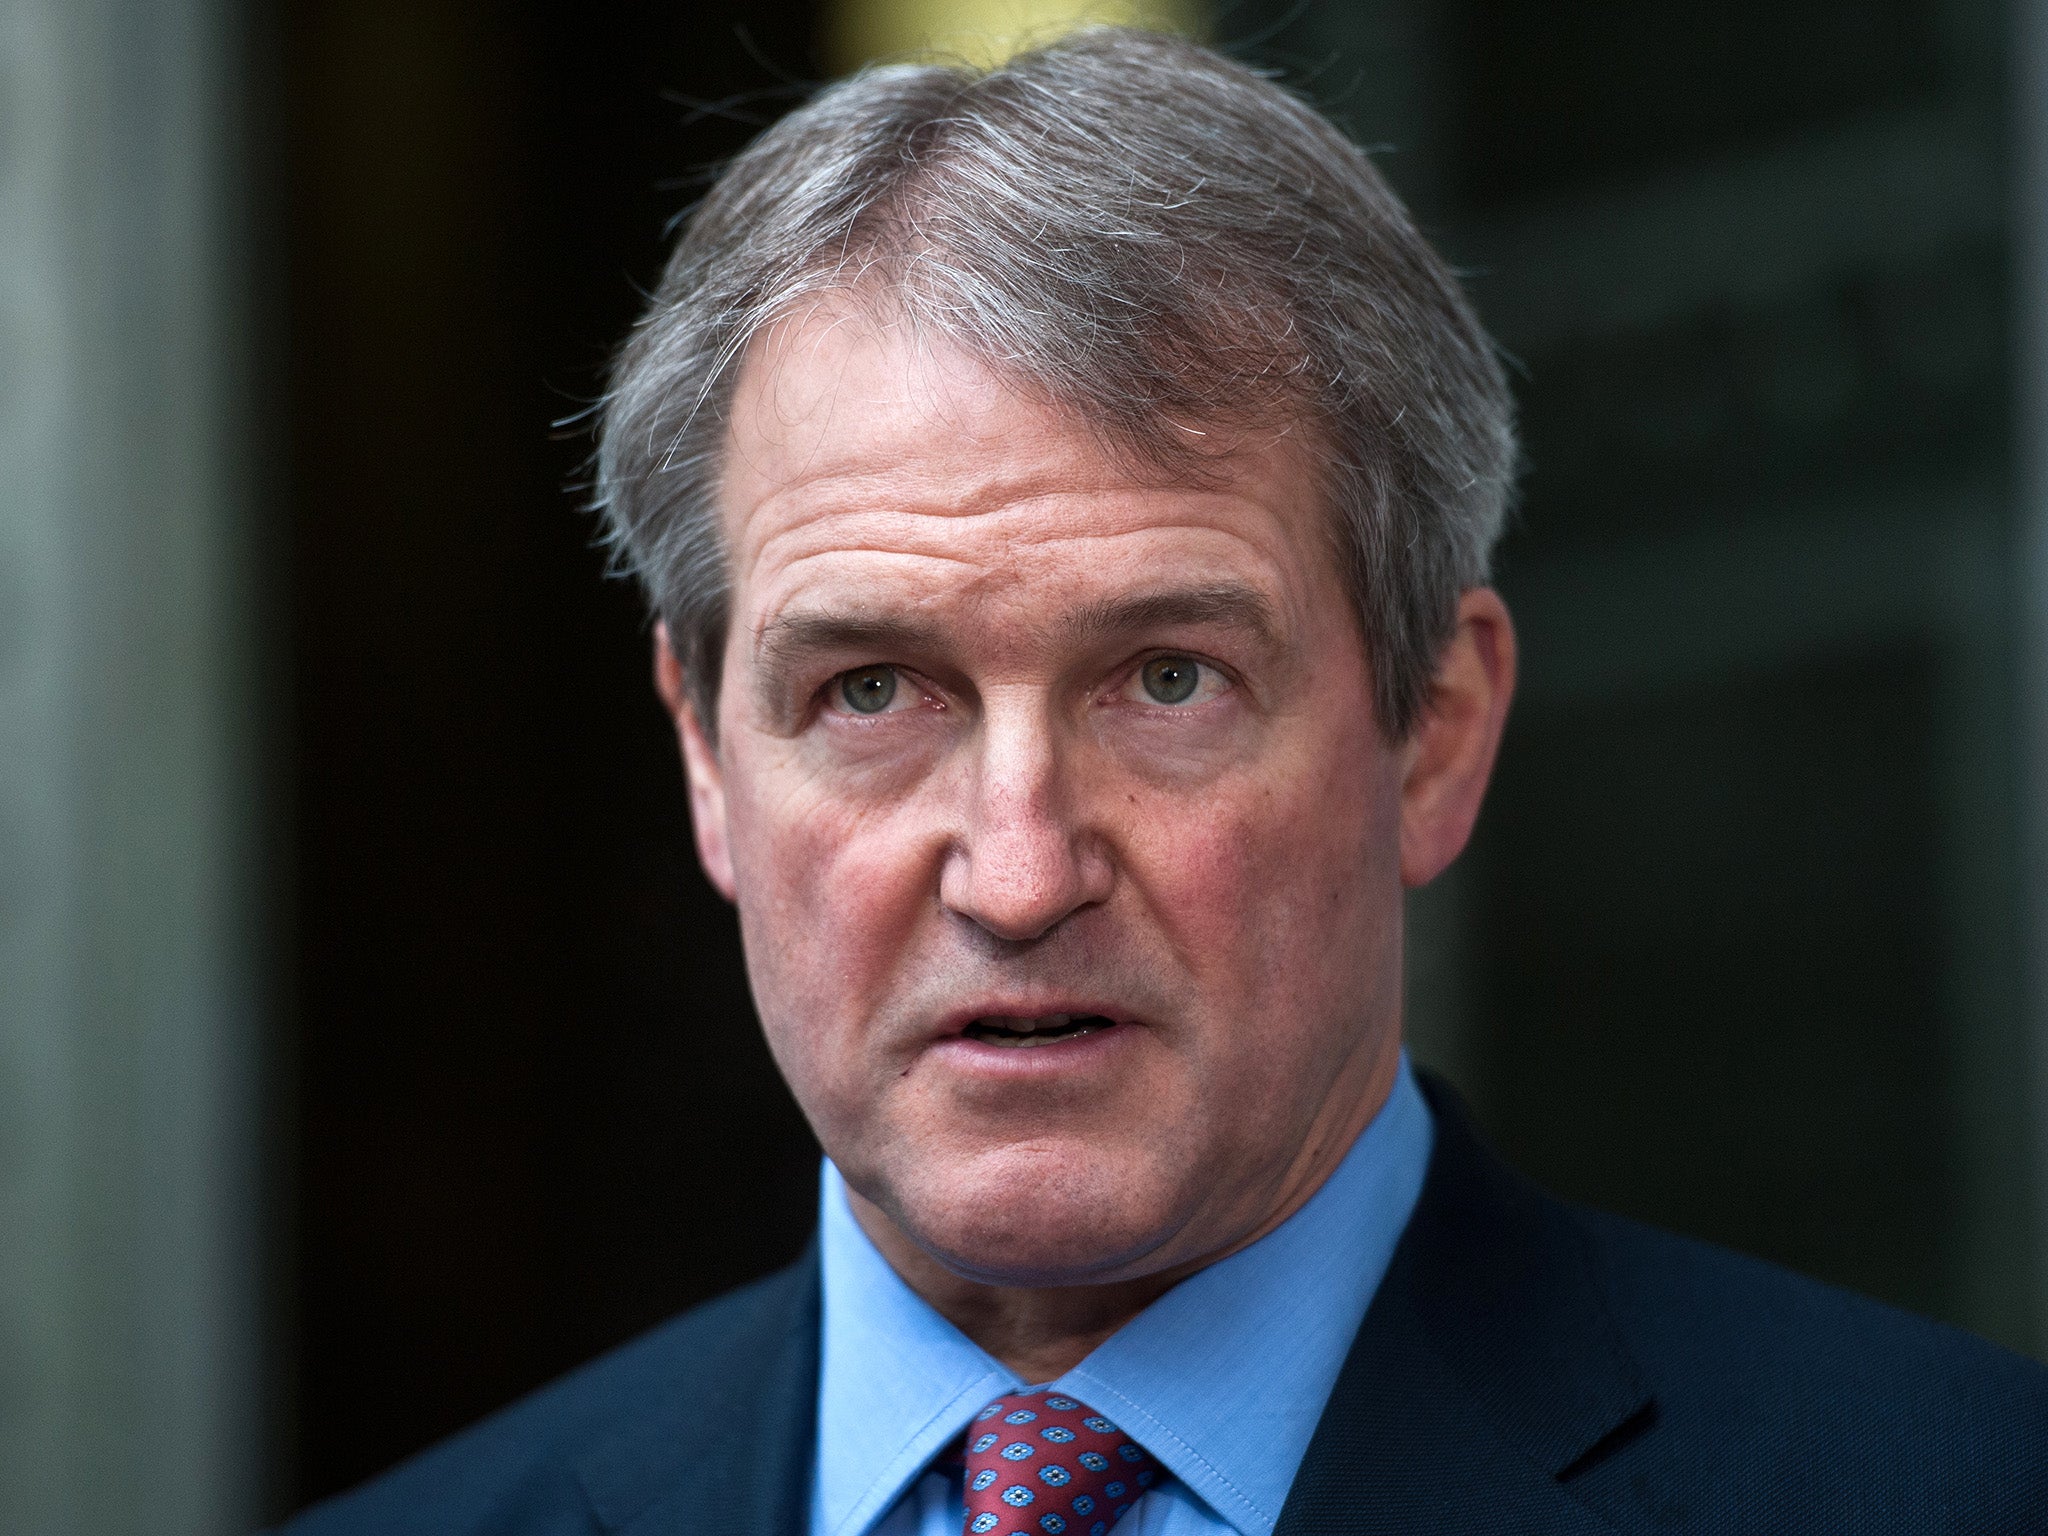 Owen Paterson was Environment Secretary between 2010 and 2014